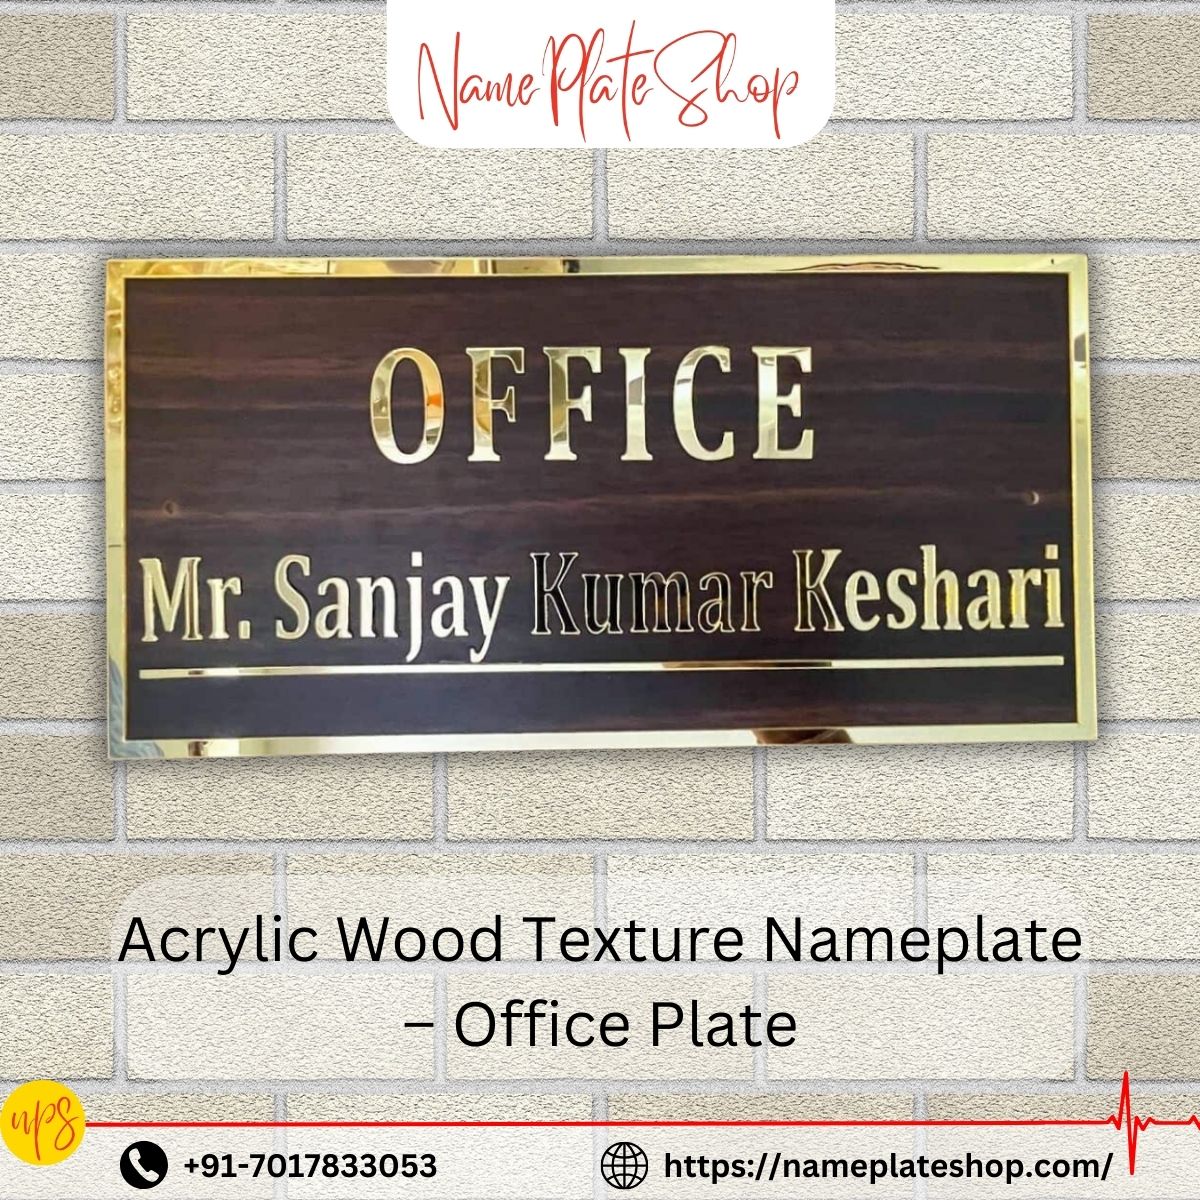 Natural Elegance in the Workplace Acrylic Wood Texture Nameplate